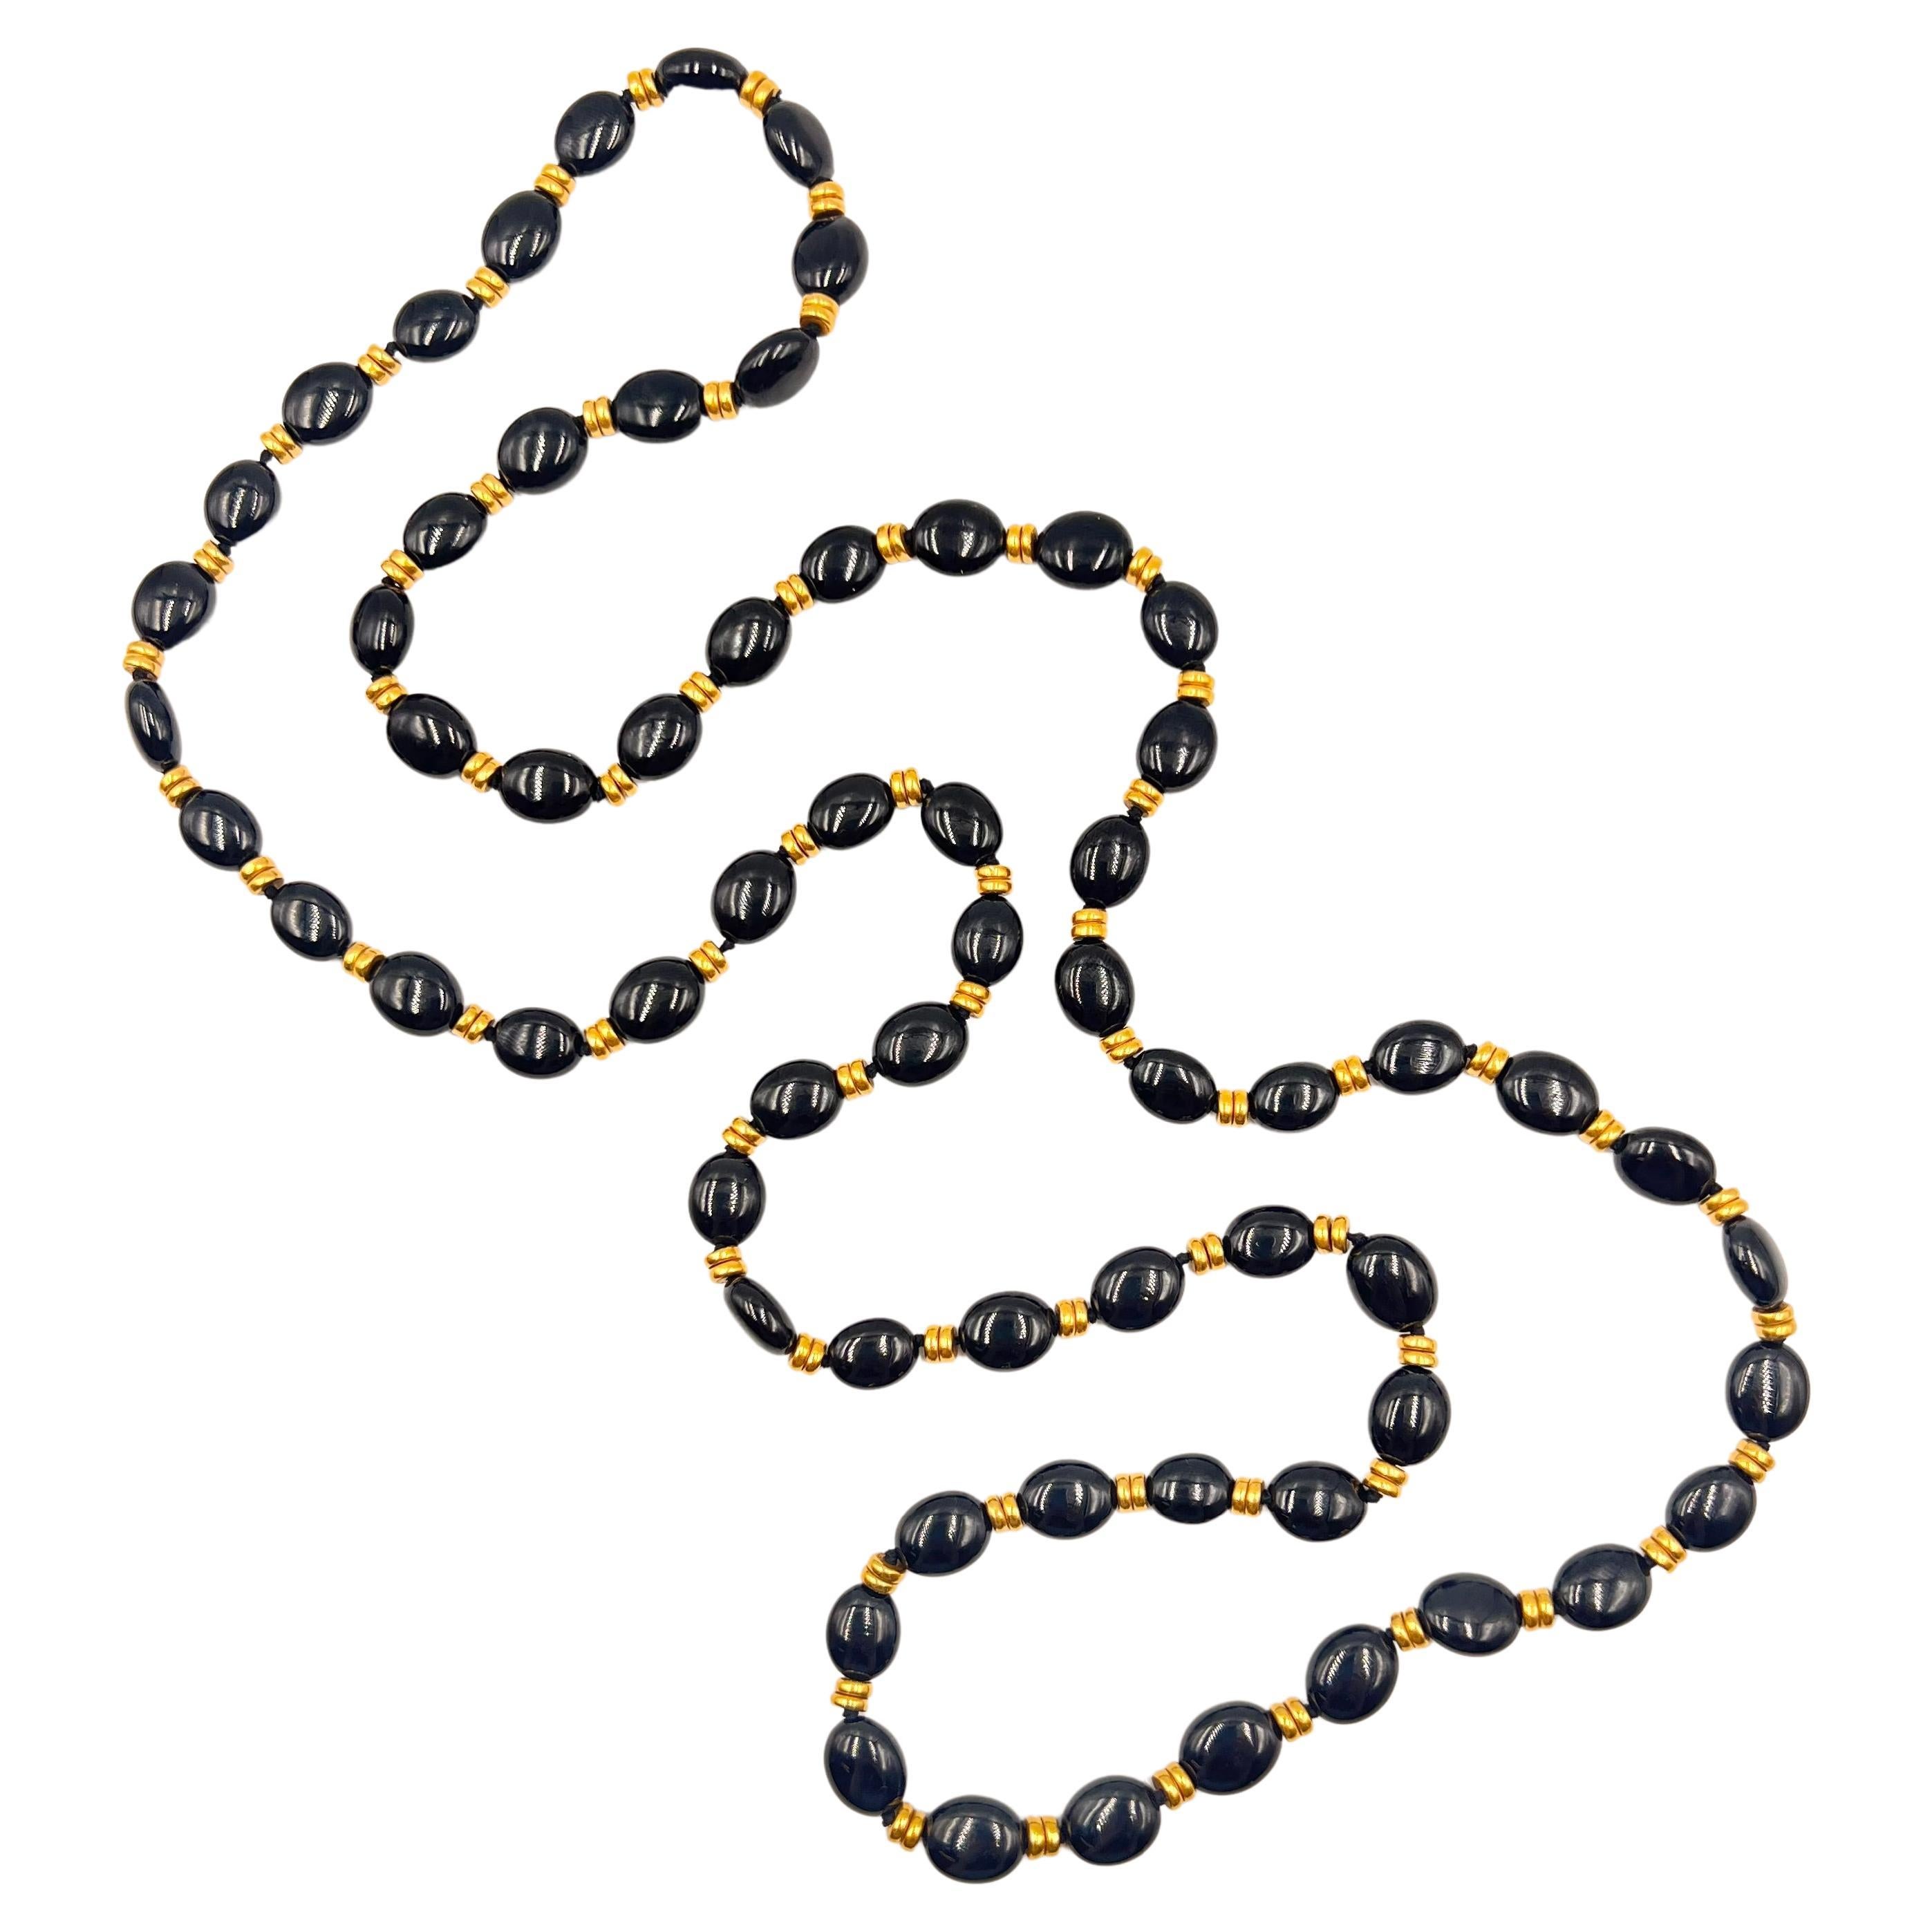 Long necklace, featuring a single-strand of sixty-five oval black onyx polished beads with double rings of 18kt yellow gold rondelle-style beads set in between each.  Measuring 37